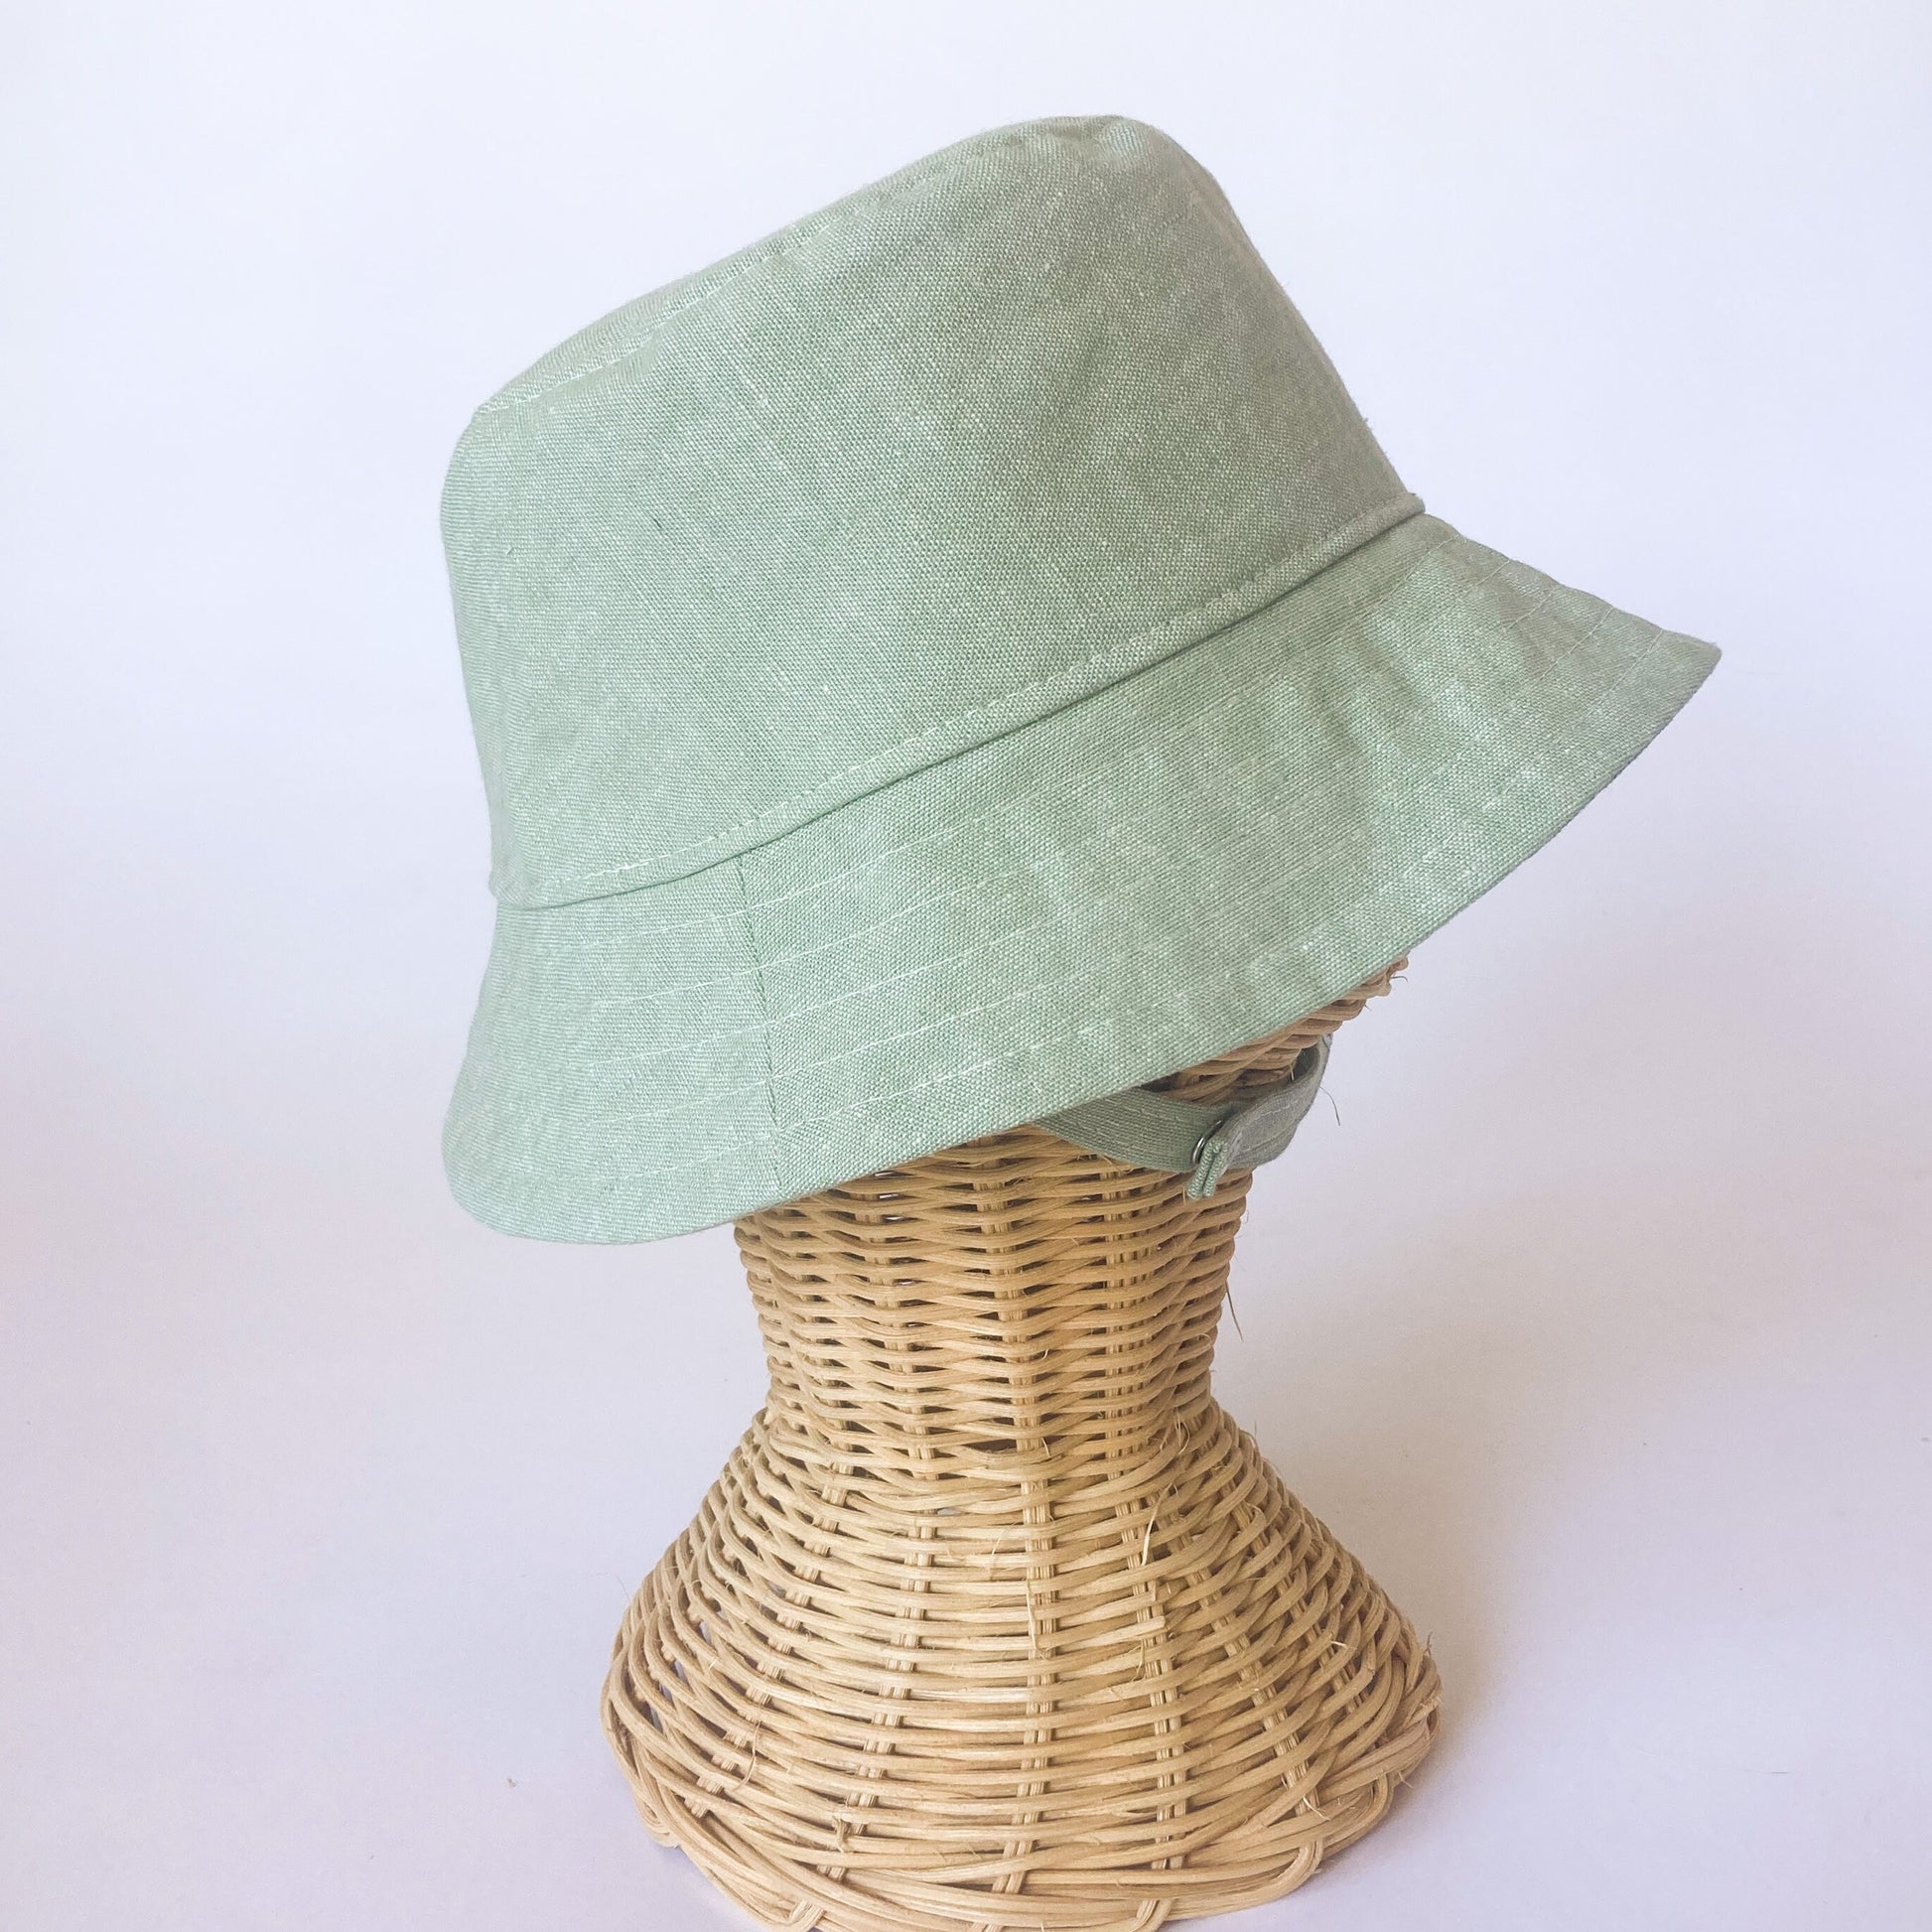 Matching Mommy and Baby Hat Set, Linen Hat, Bucket Hats, Mama and Mini Matching Hats, Baby Beach Hat, Summer Newborn Gift, New Mom Gift